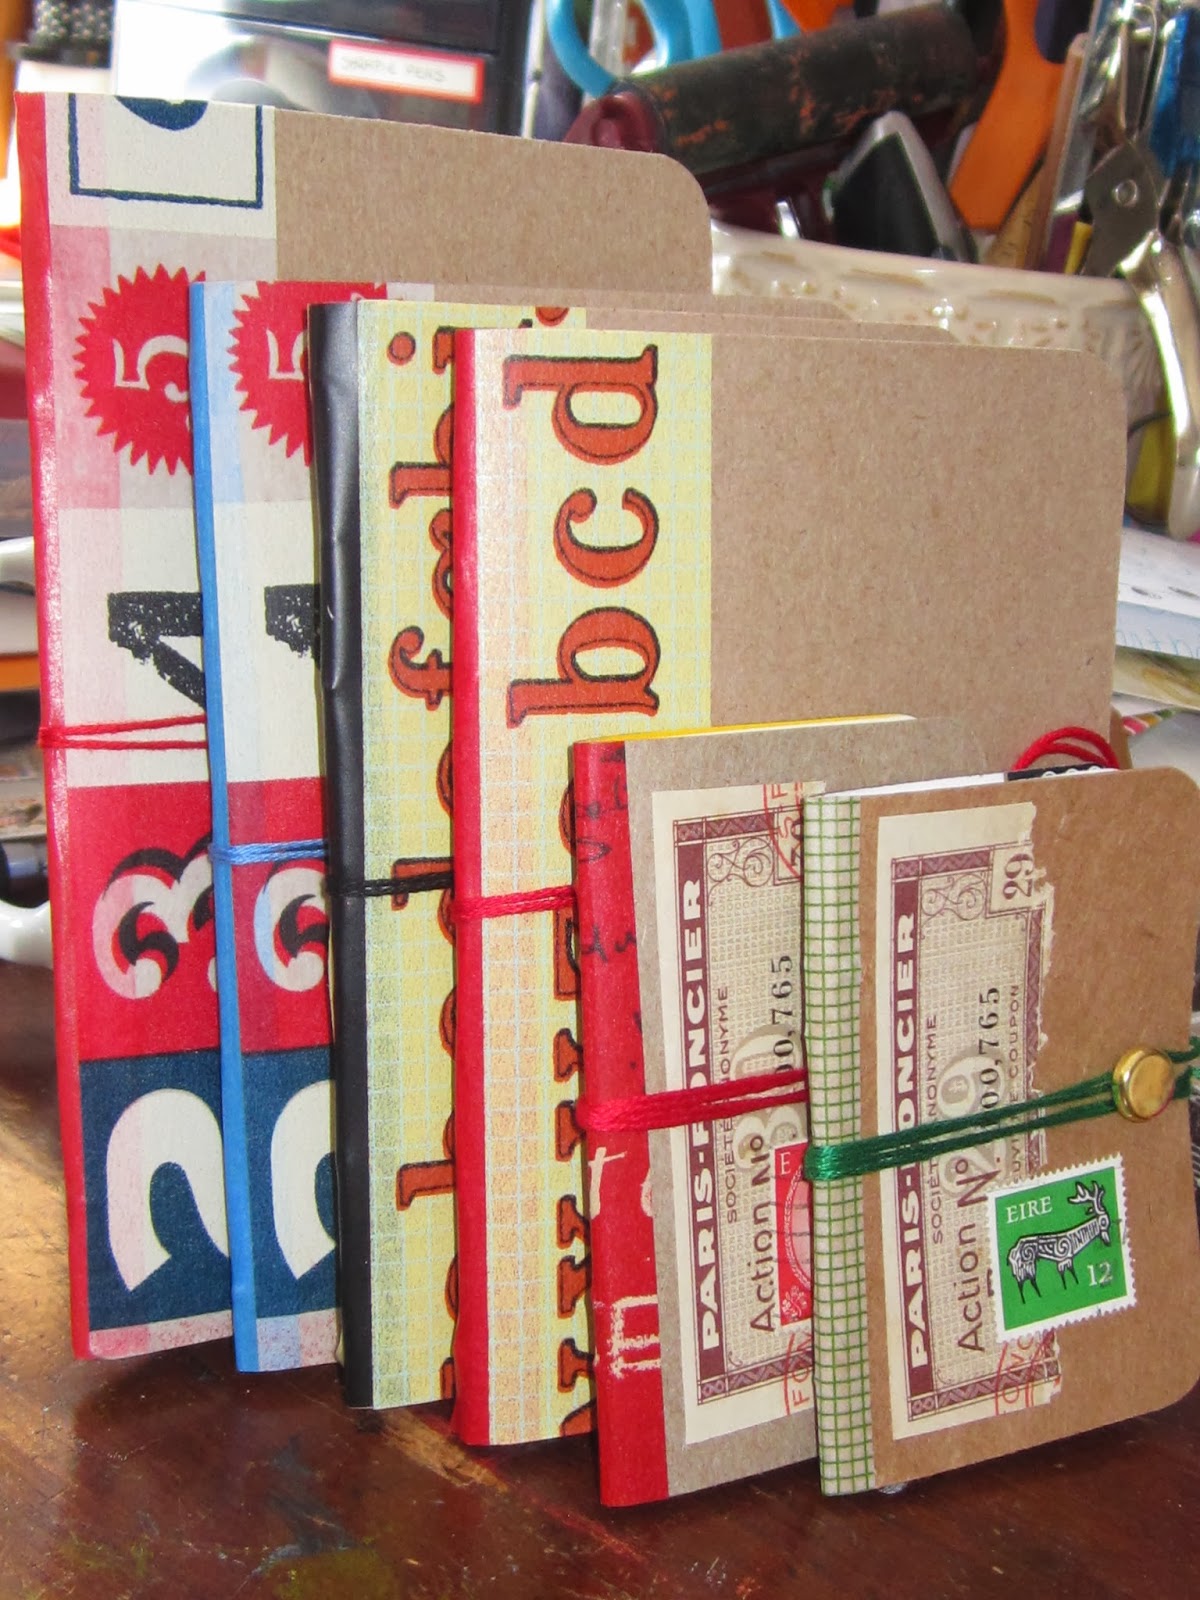 Drawing near: That's Pinteresting!: Cereal Box Books